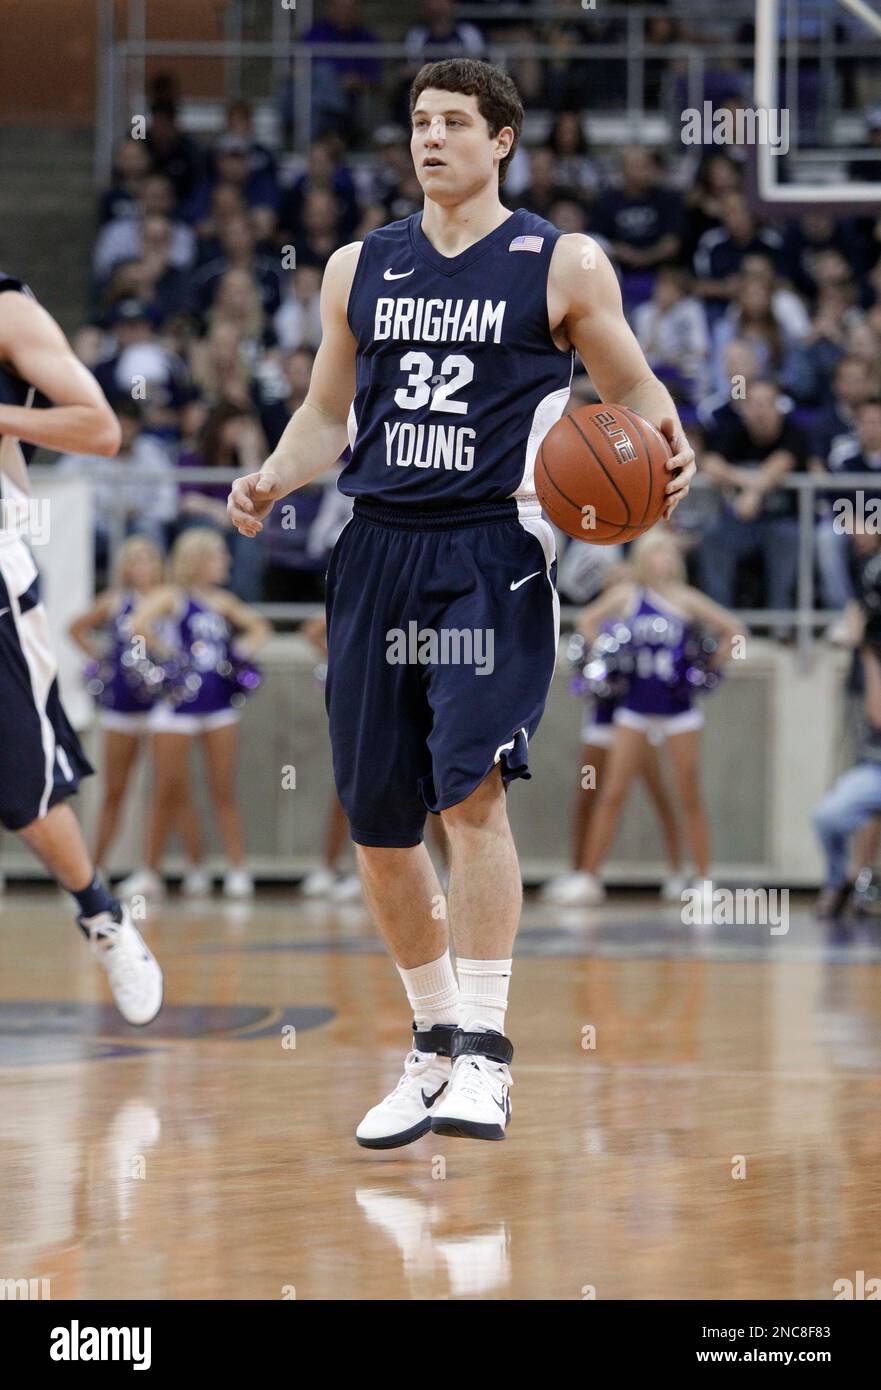 BYU's Jimmer Fredette is AP men's basketball player of the year